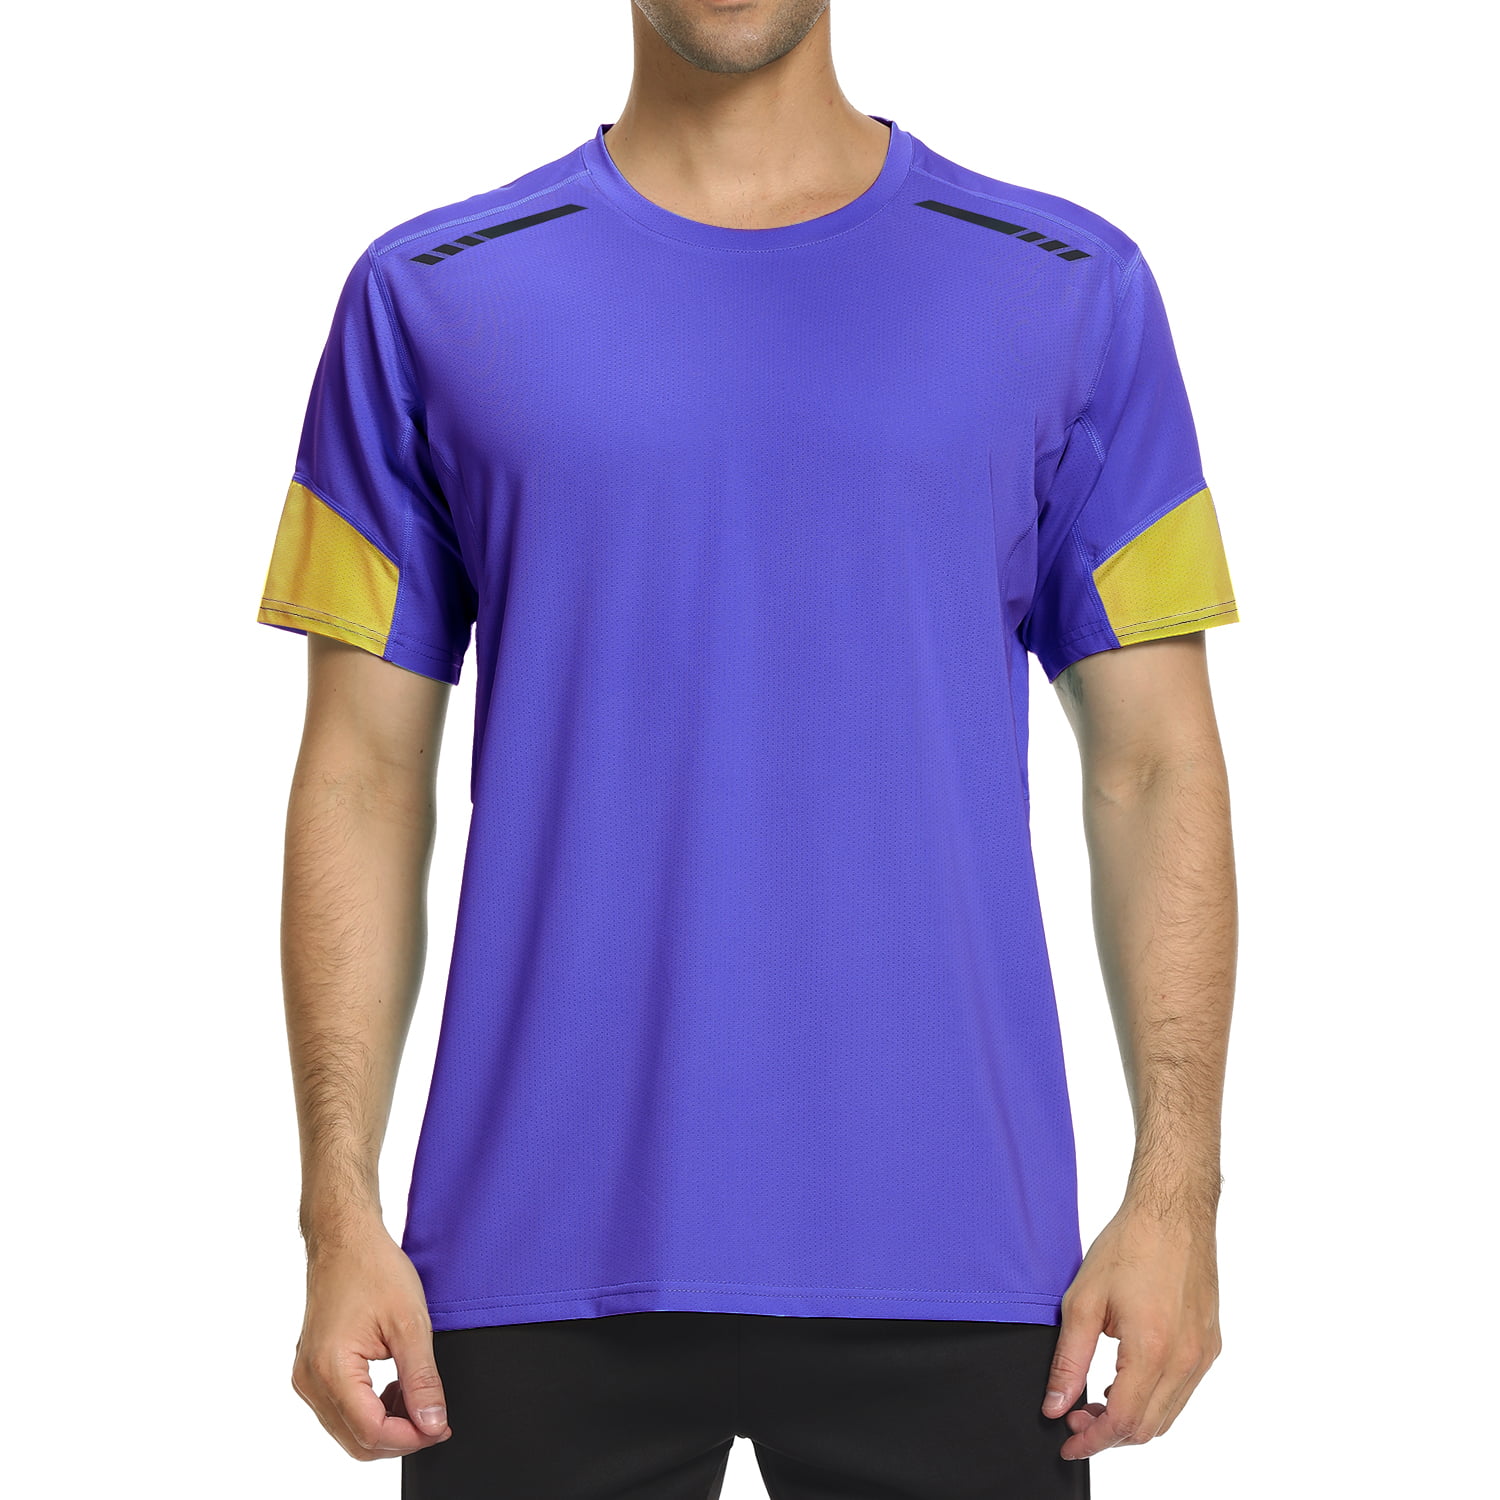 Mens Breathable T-Shirt Wicking Shirt Top Running Gym Sports Fitness Cool Dry